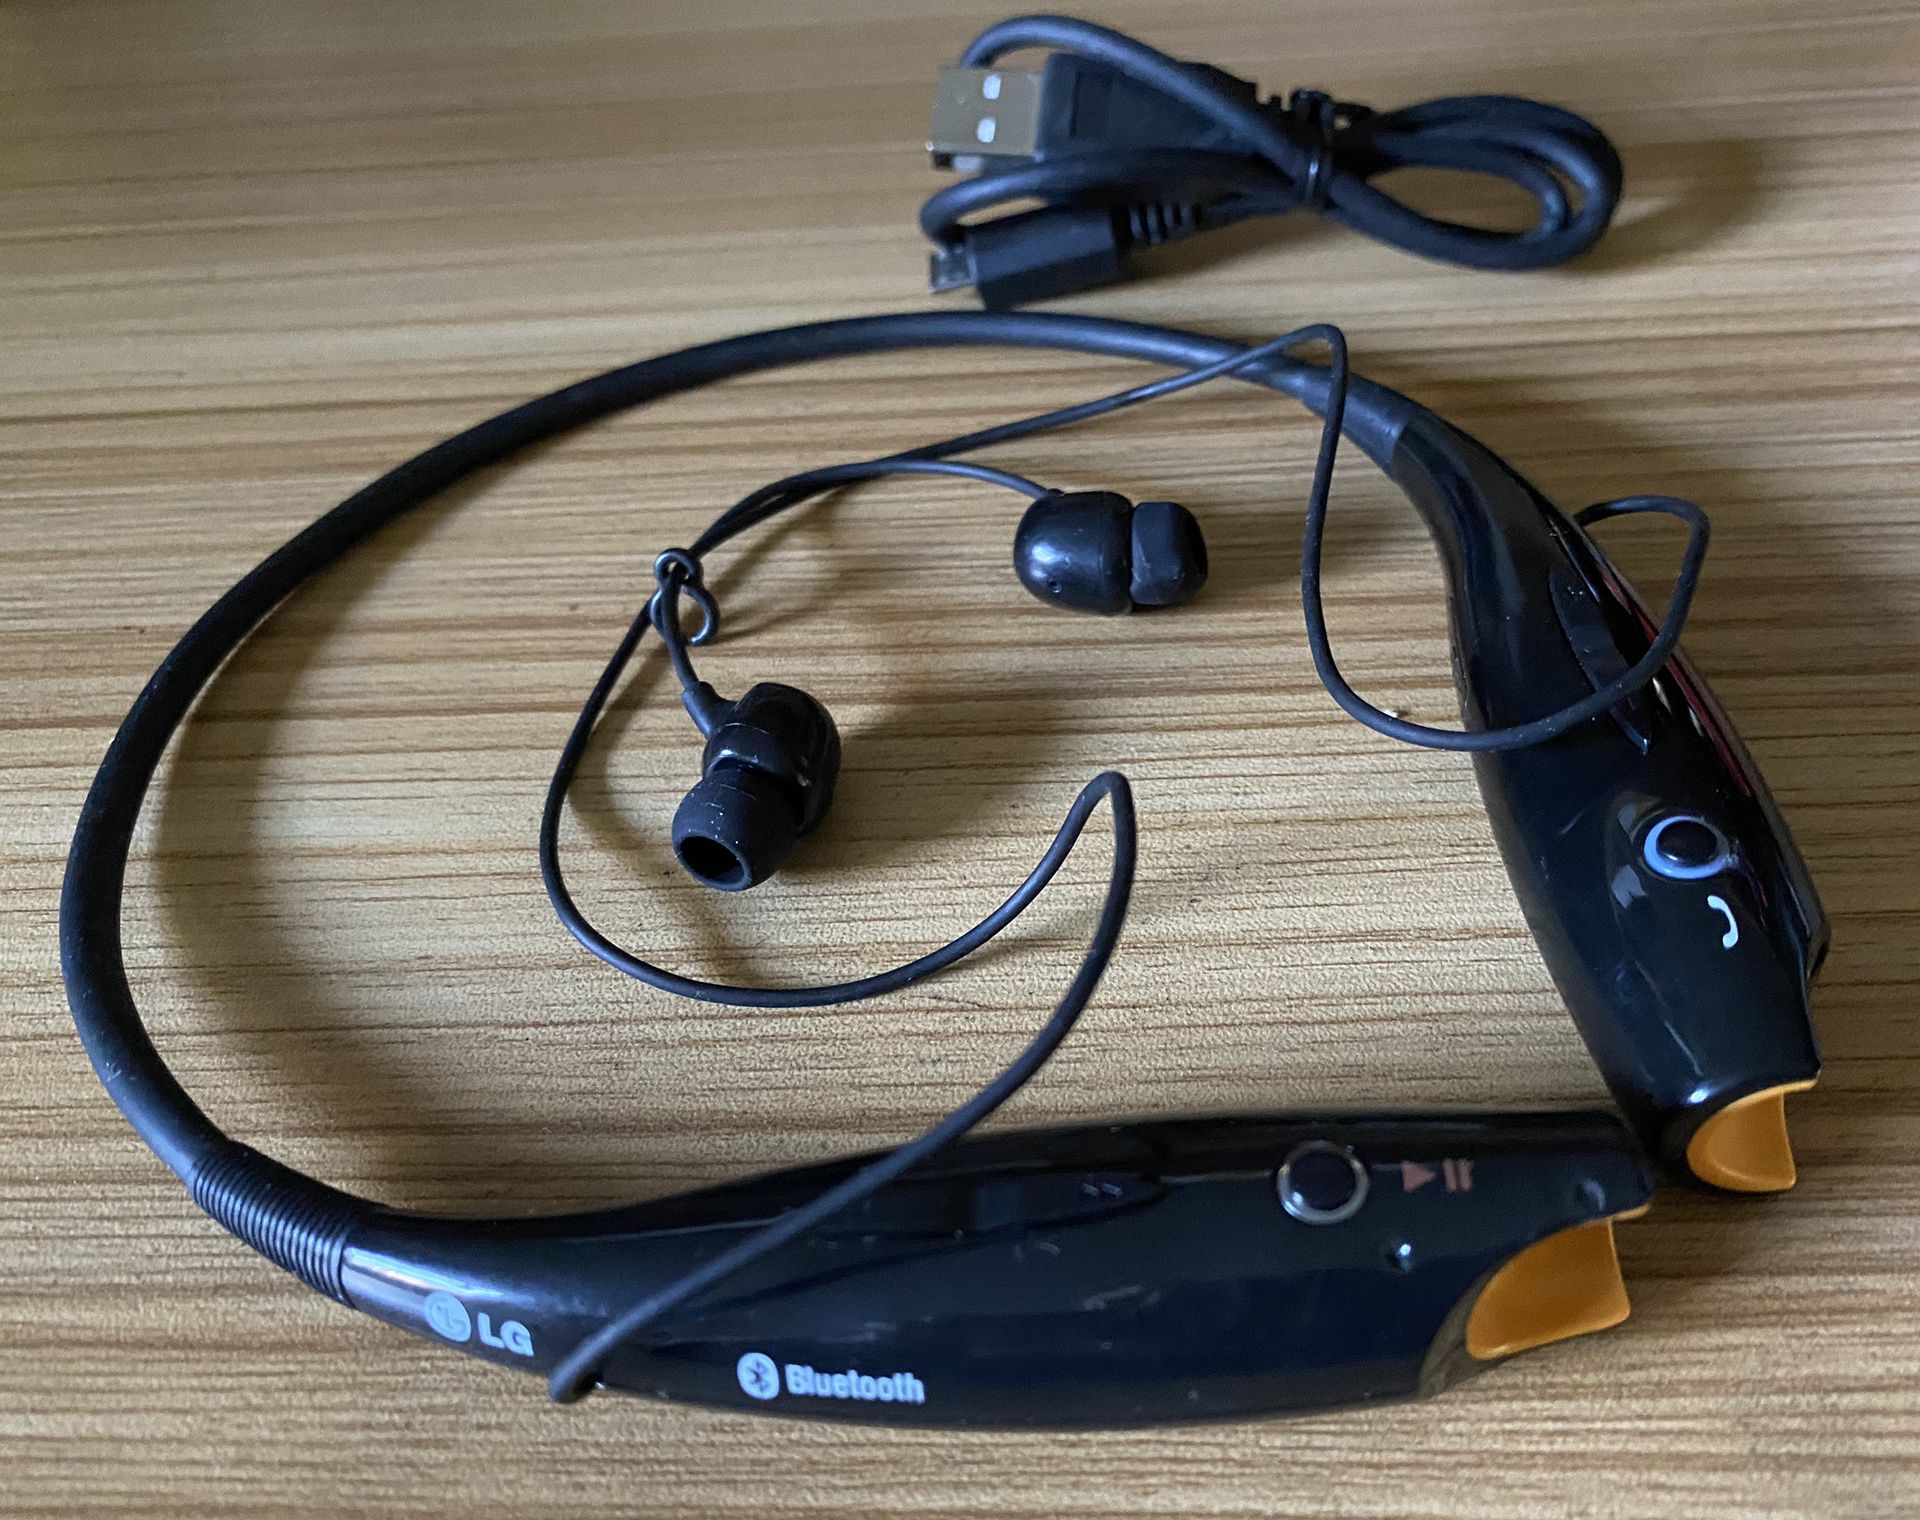 Grudge slank Bliv ved LG TONE HBS- 700 Bluetooth Wireless Stereo Headset for Sale in Torrance, CA  - OfferUp